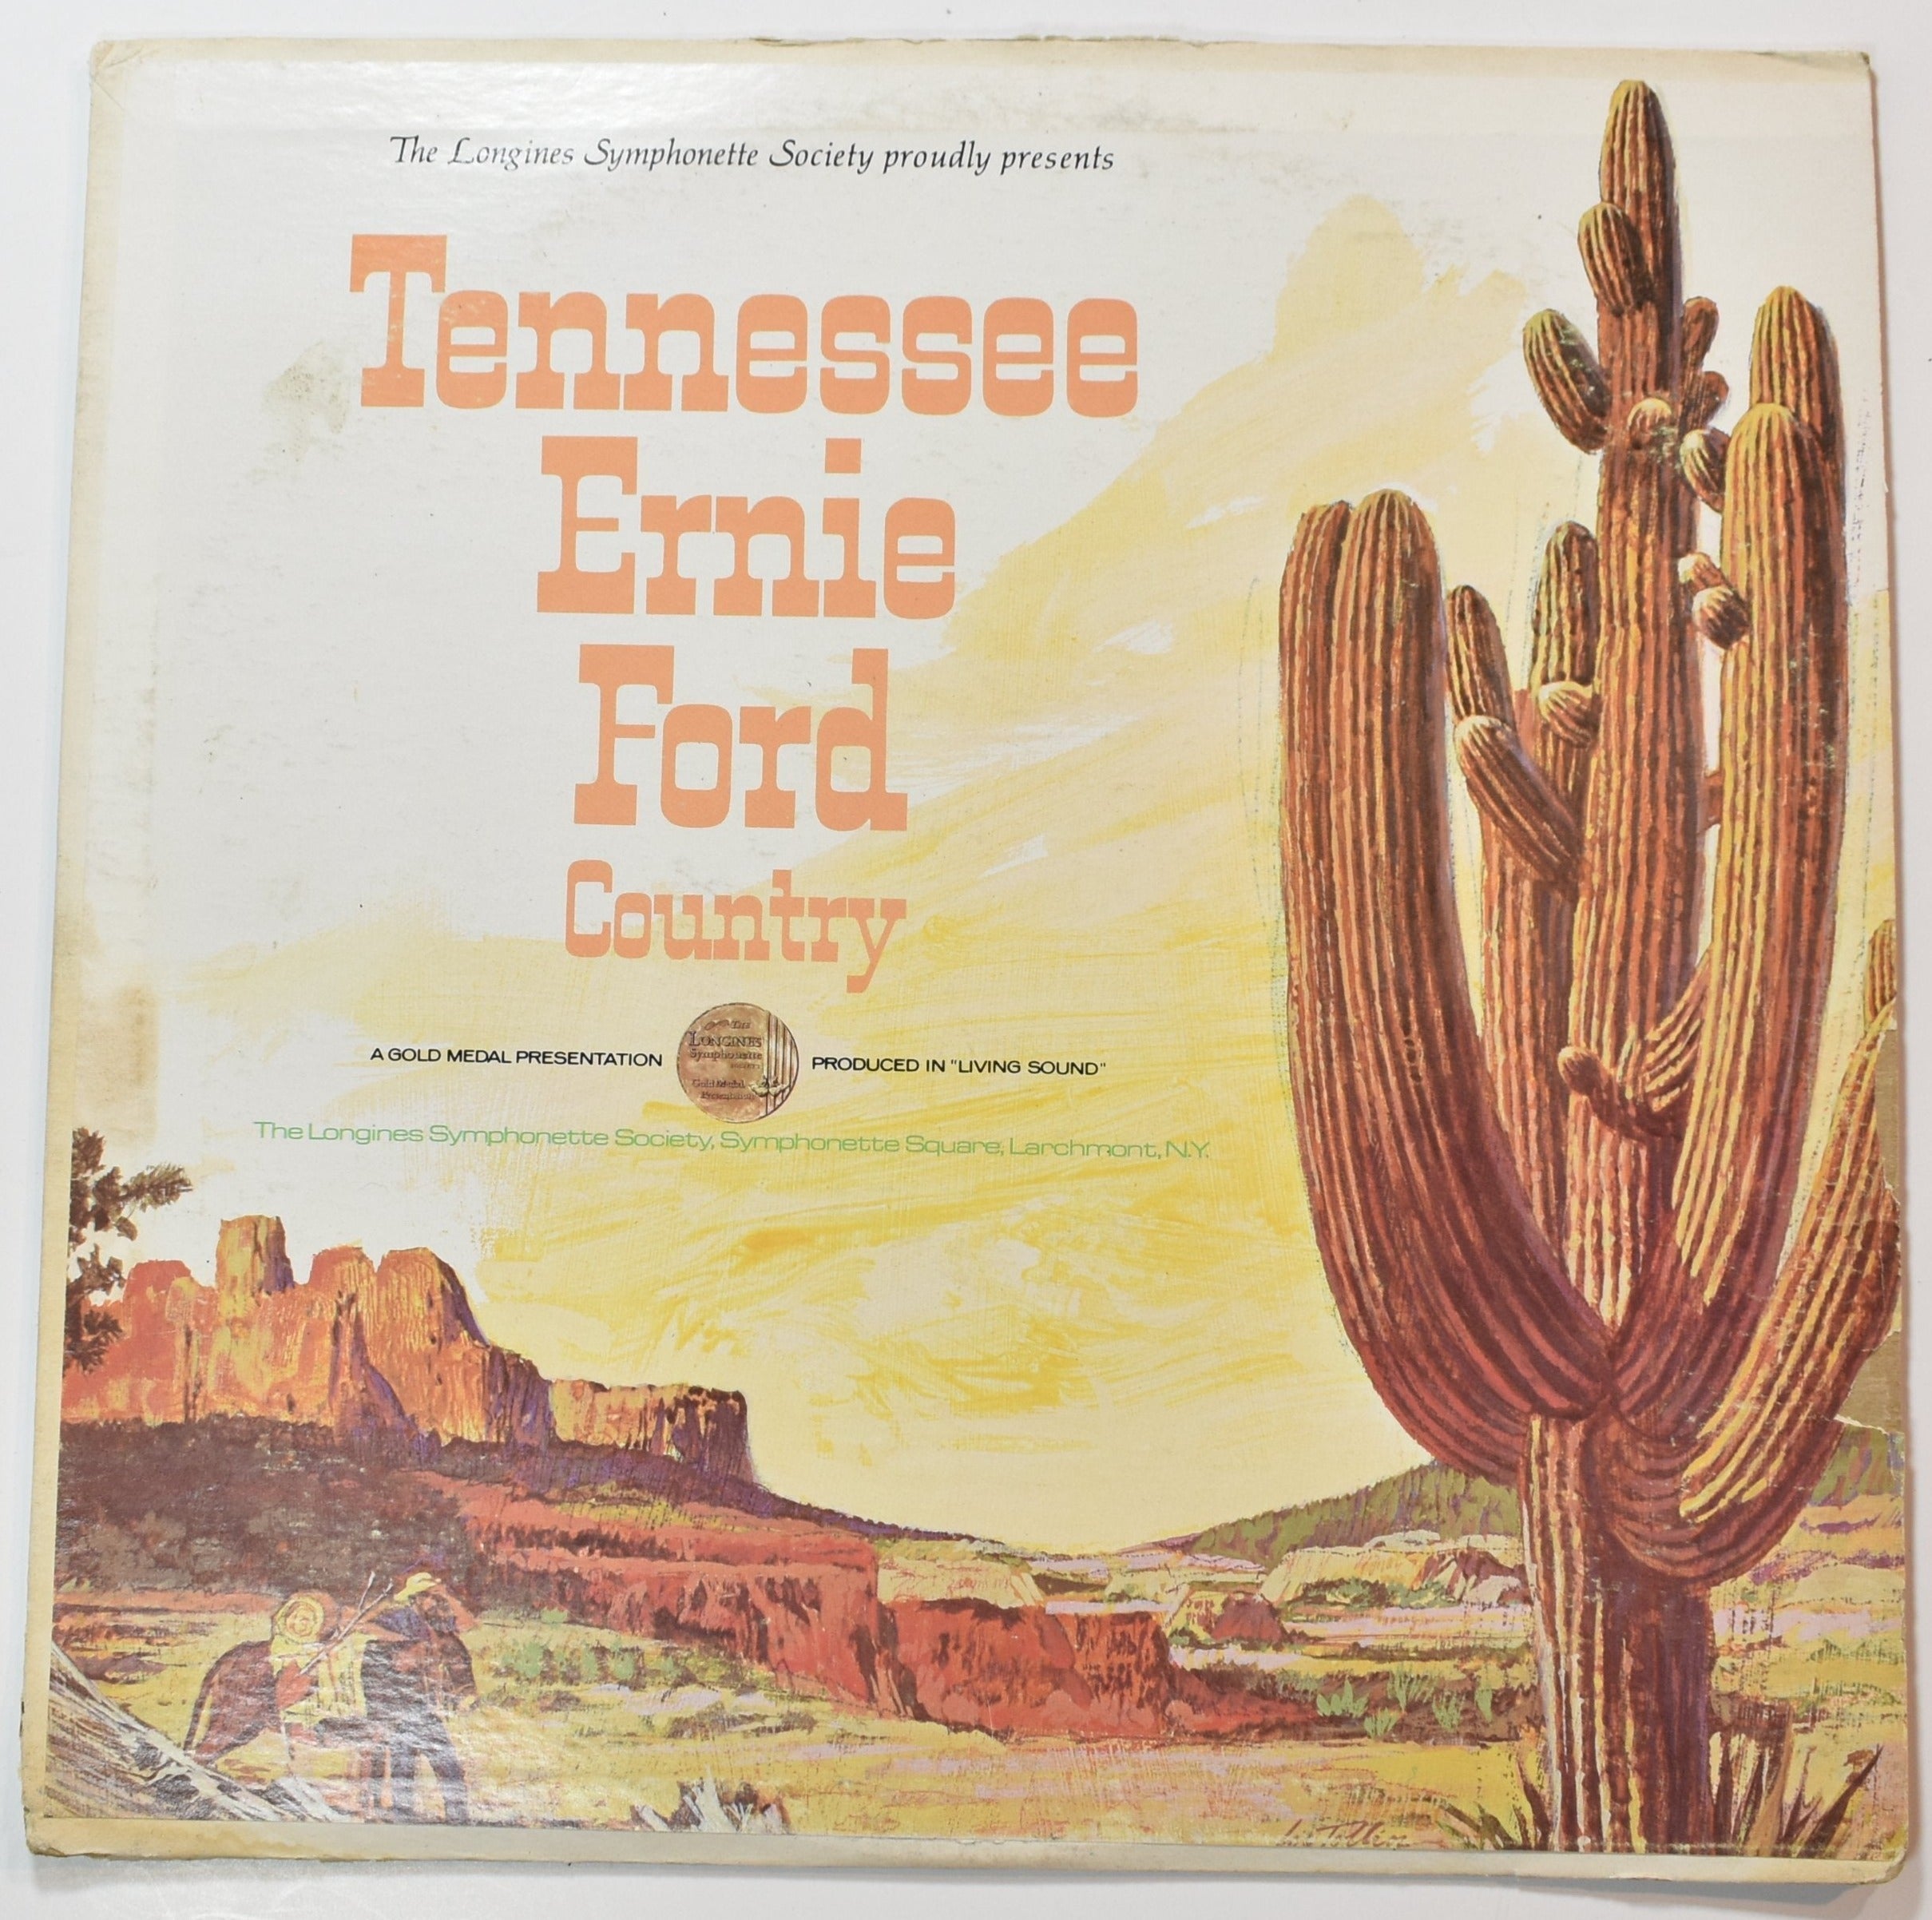 Vinyl Music Record Tennessee Ernie Ford Country Used record